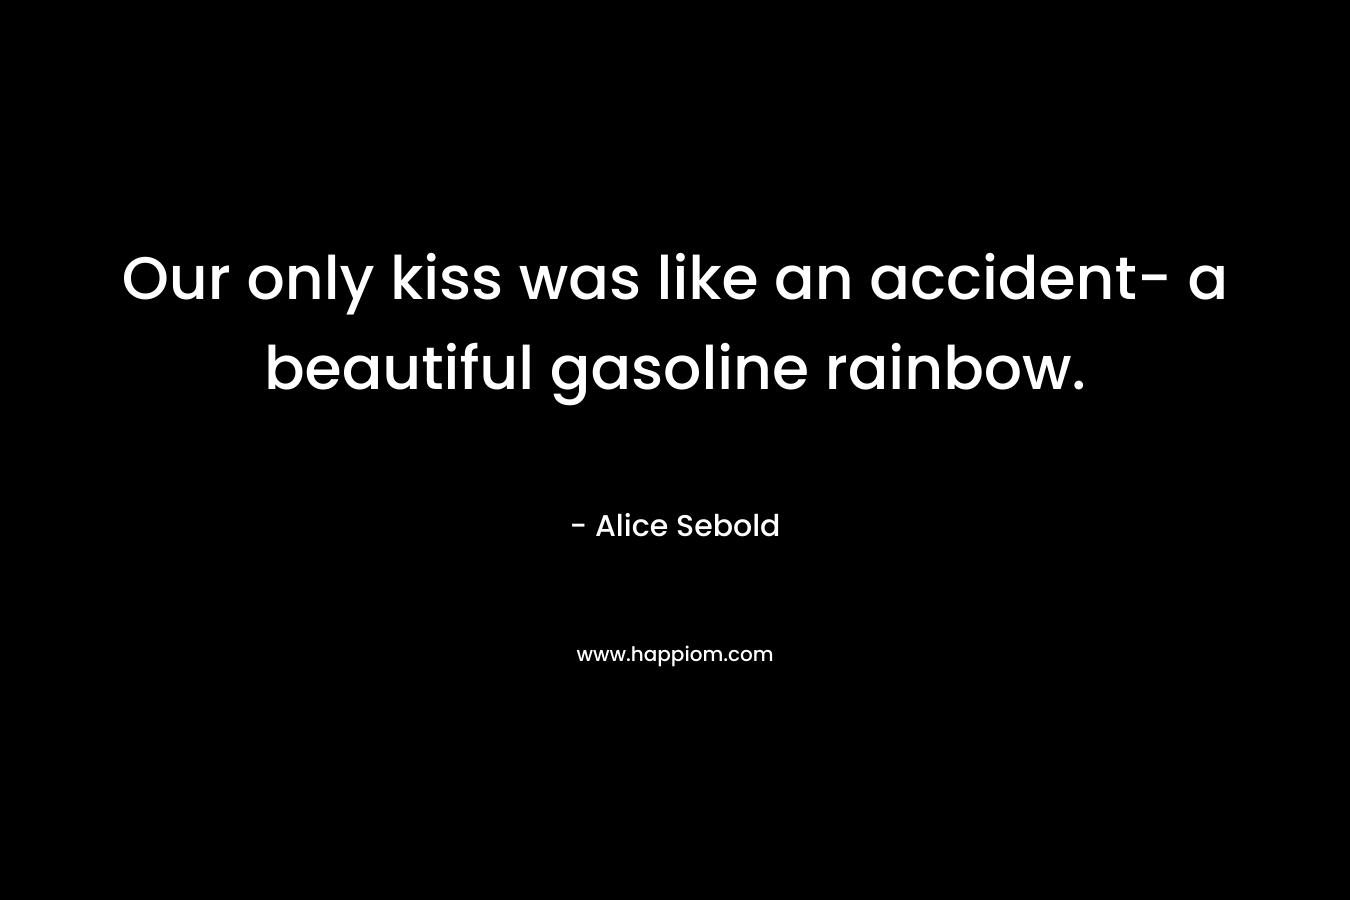 Our only kiss was like an accident- a beautiful gasoline rainbow. – Alice Sebold